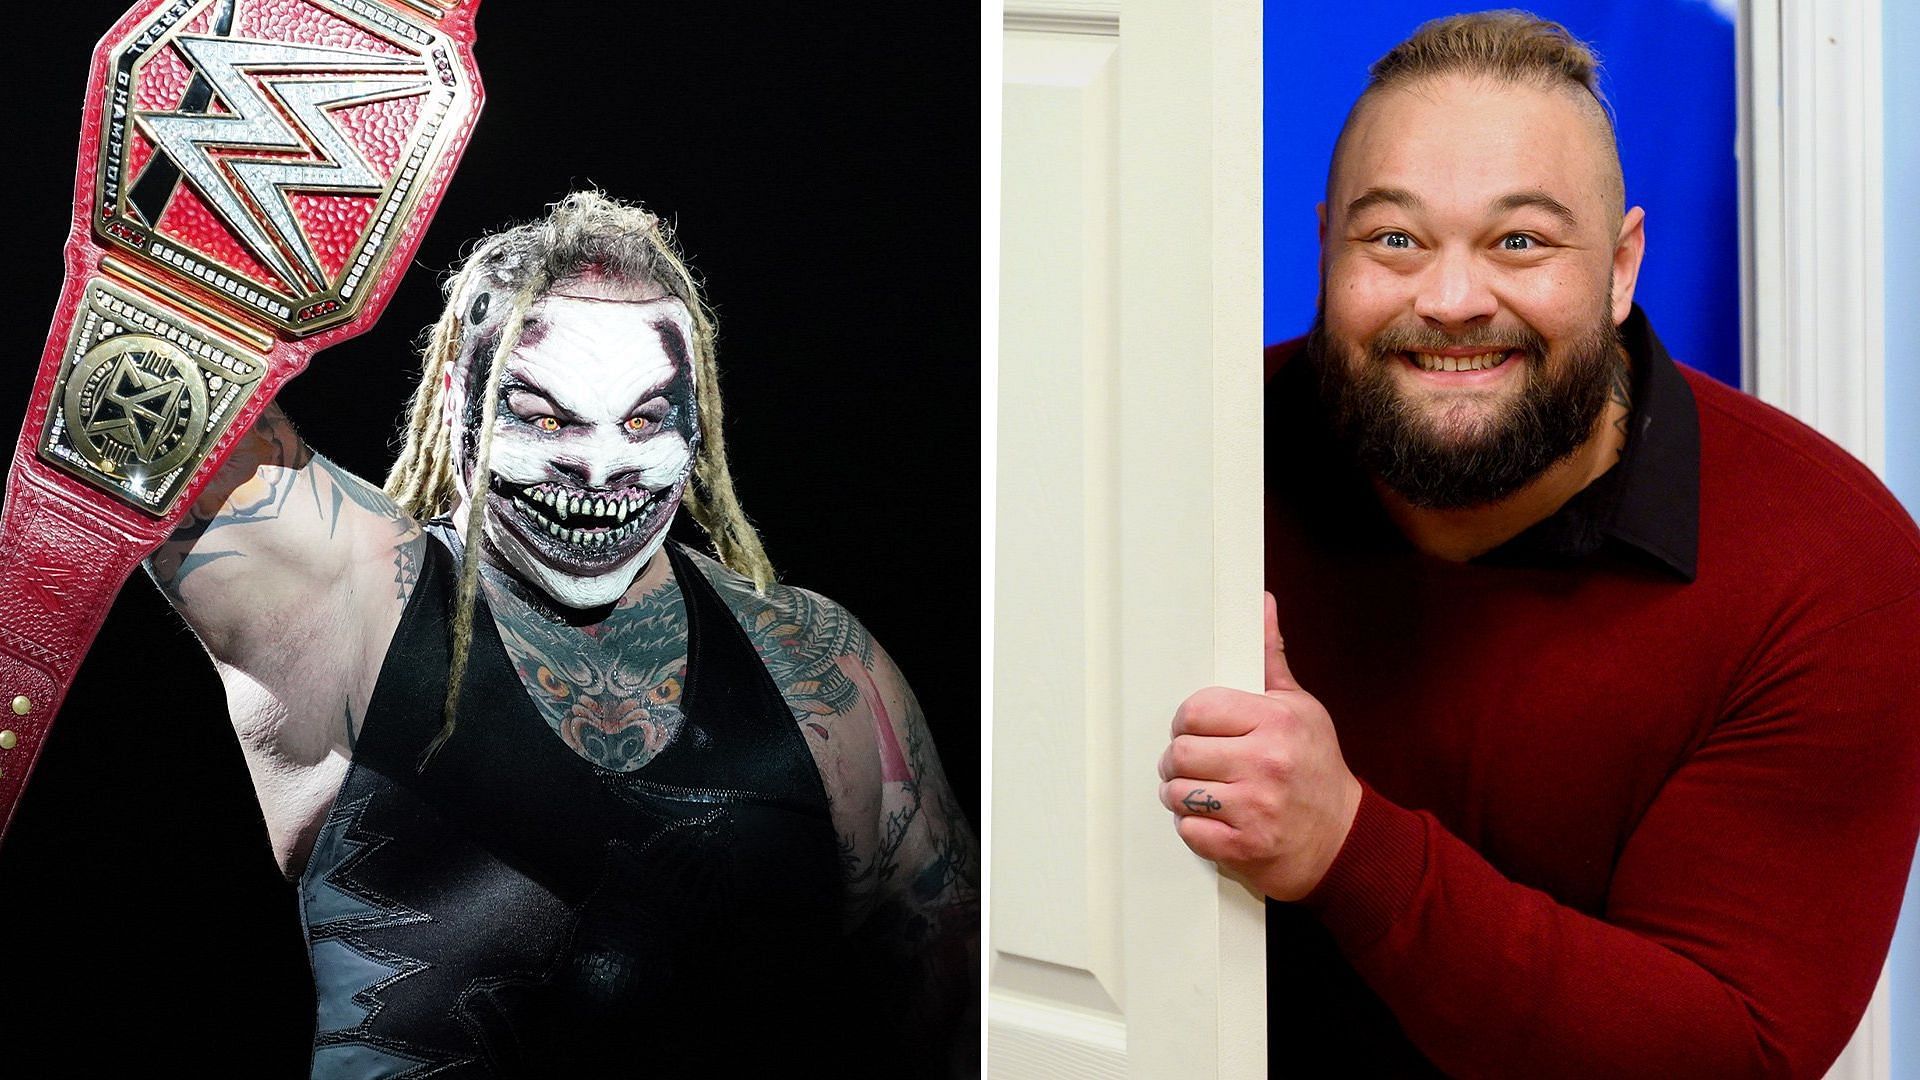 Could Bray Wyatt return at Hell in a Cell?